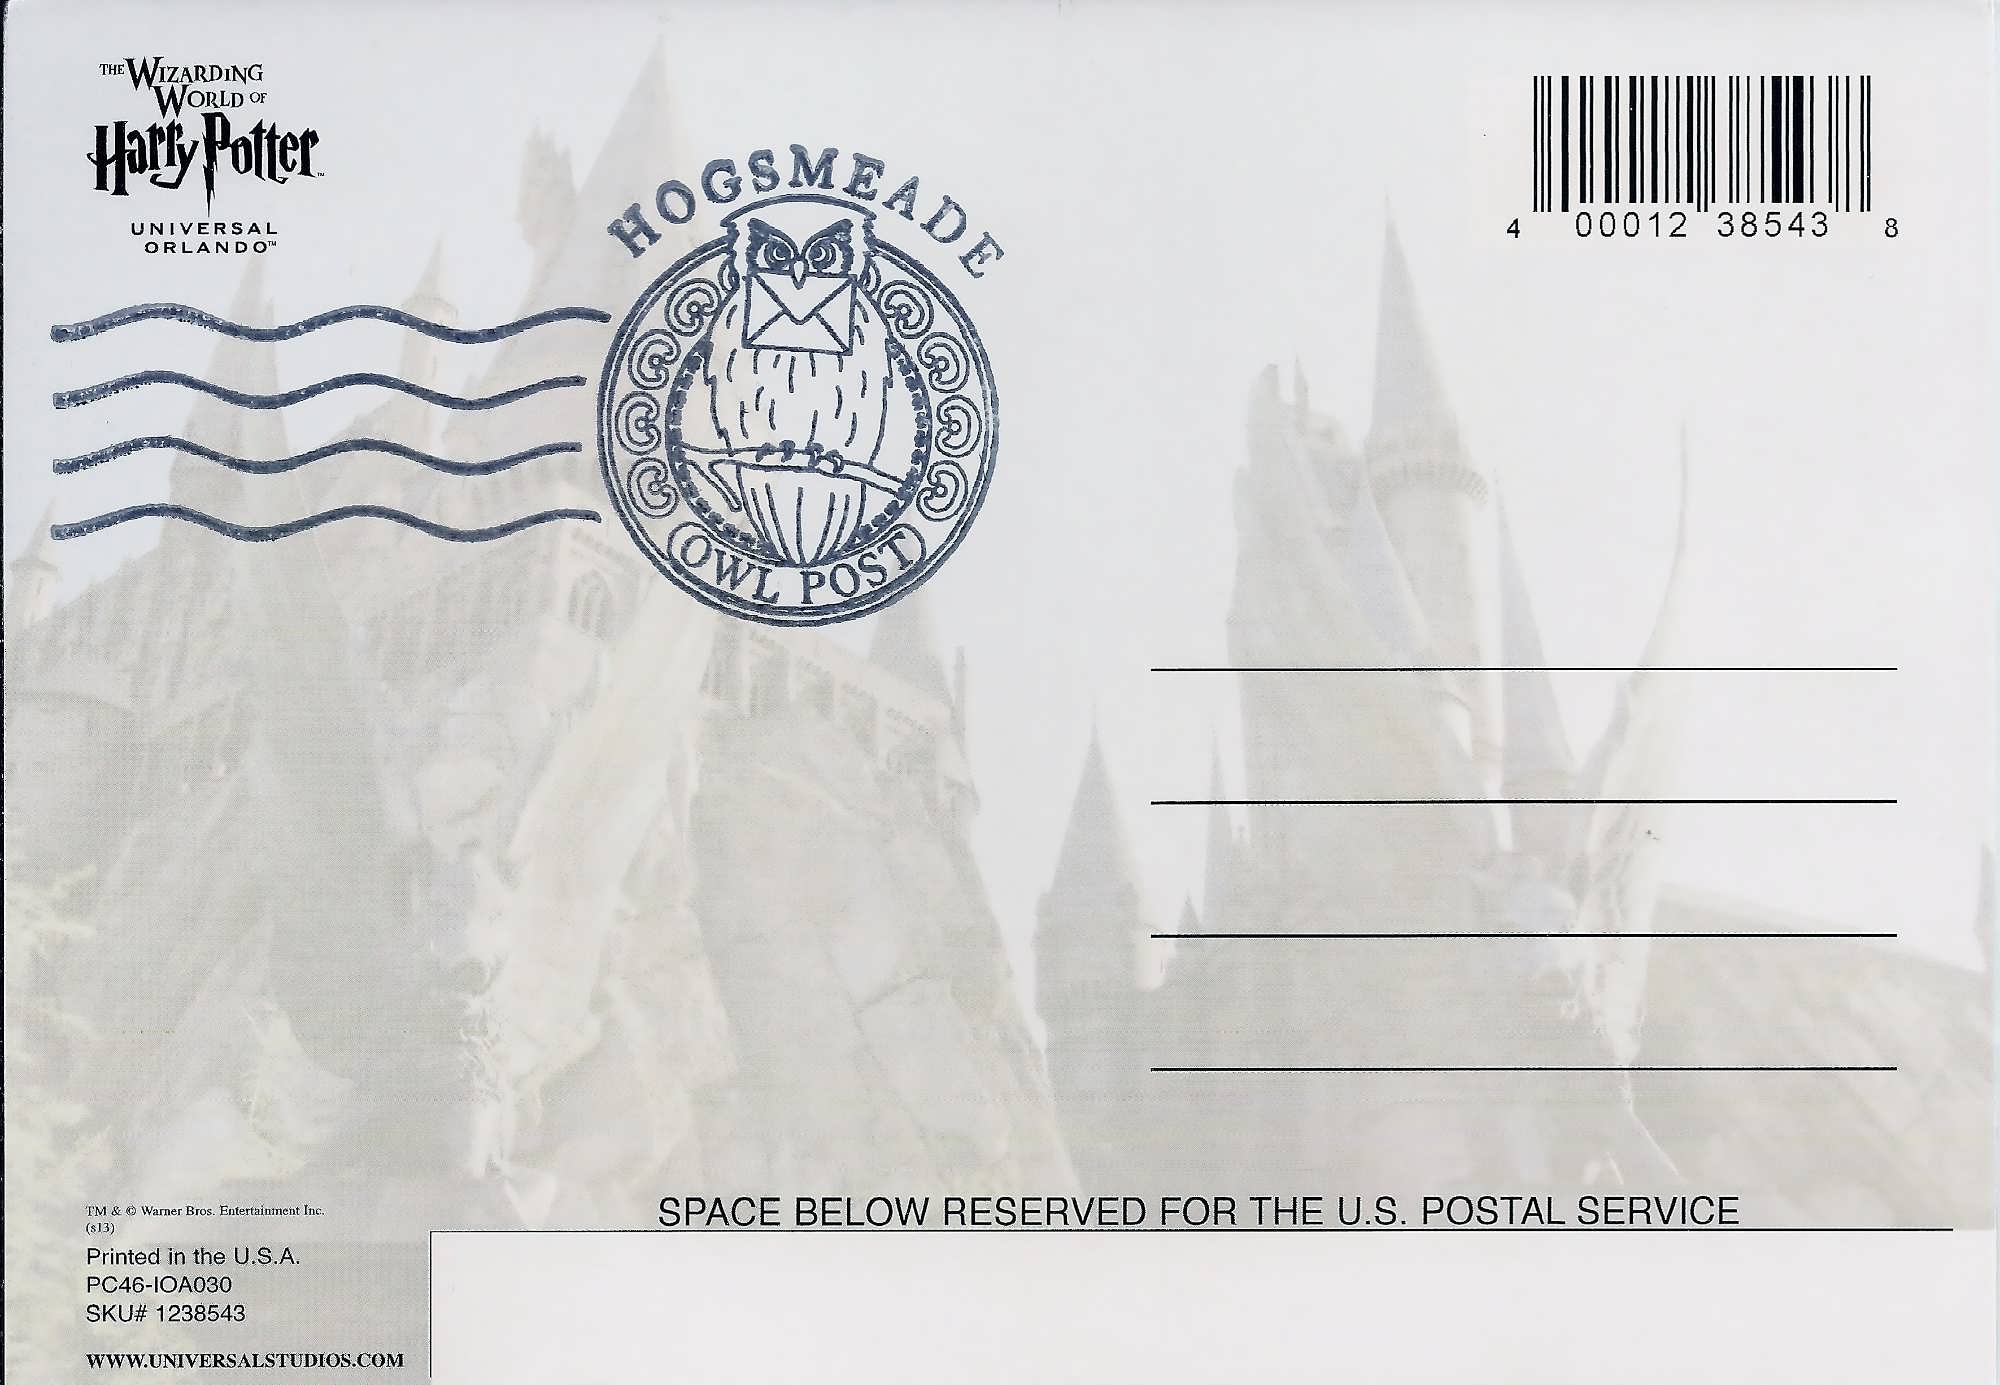 Owl Post Logo - Wizarding World of Harry Potter merchandise - complete guide to ...